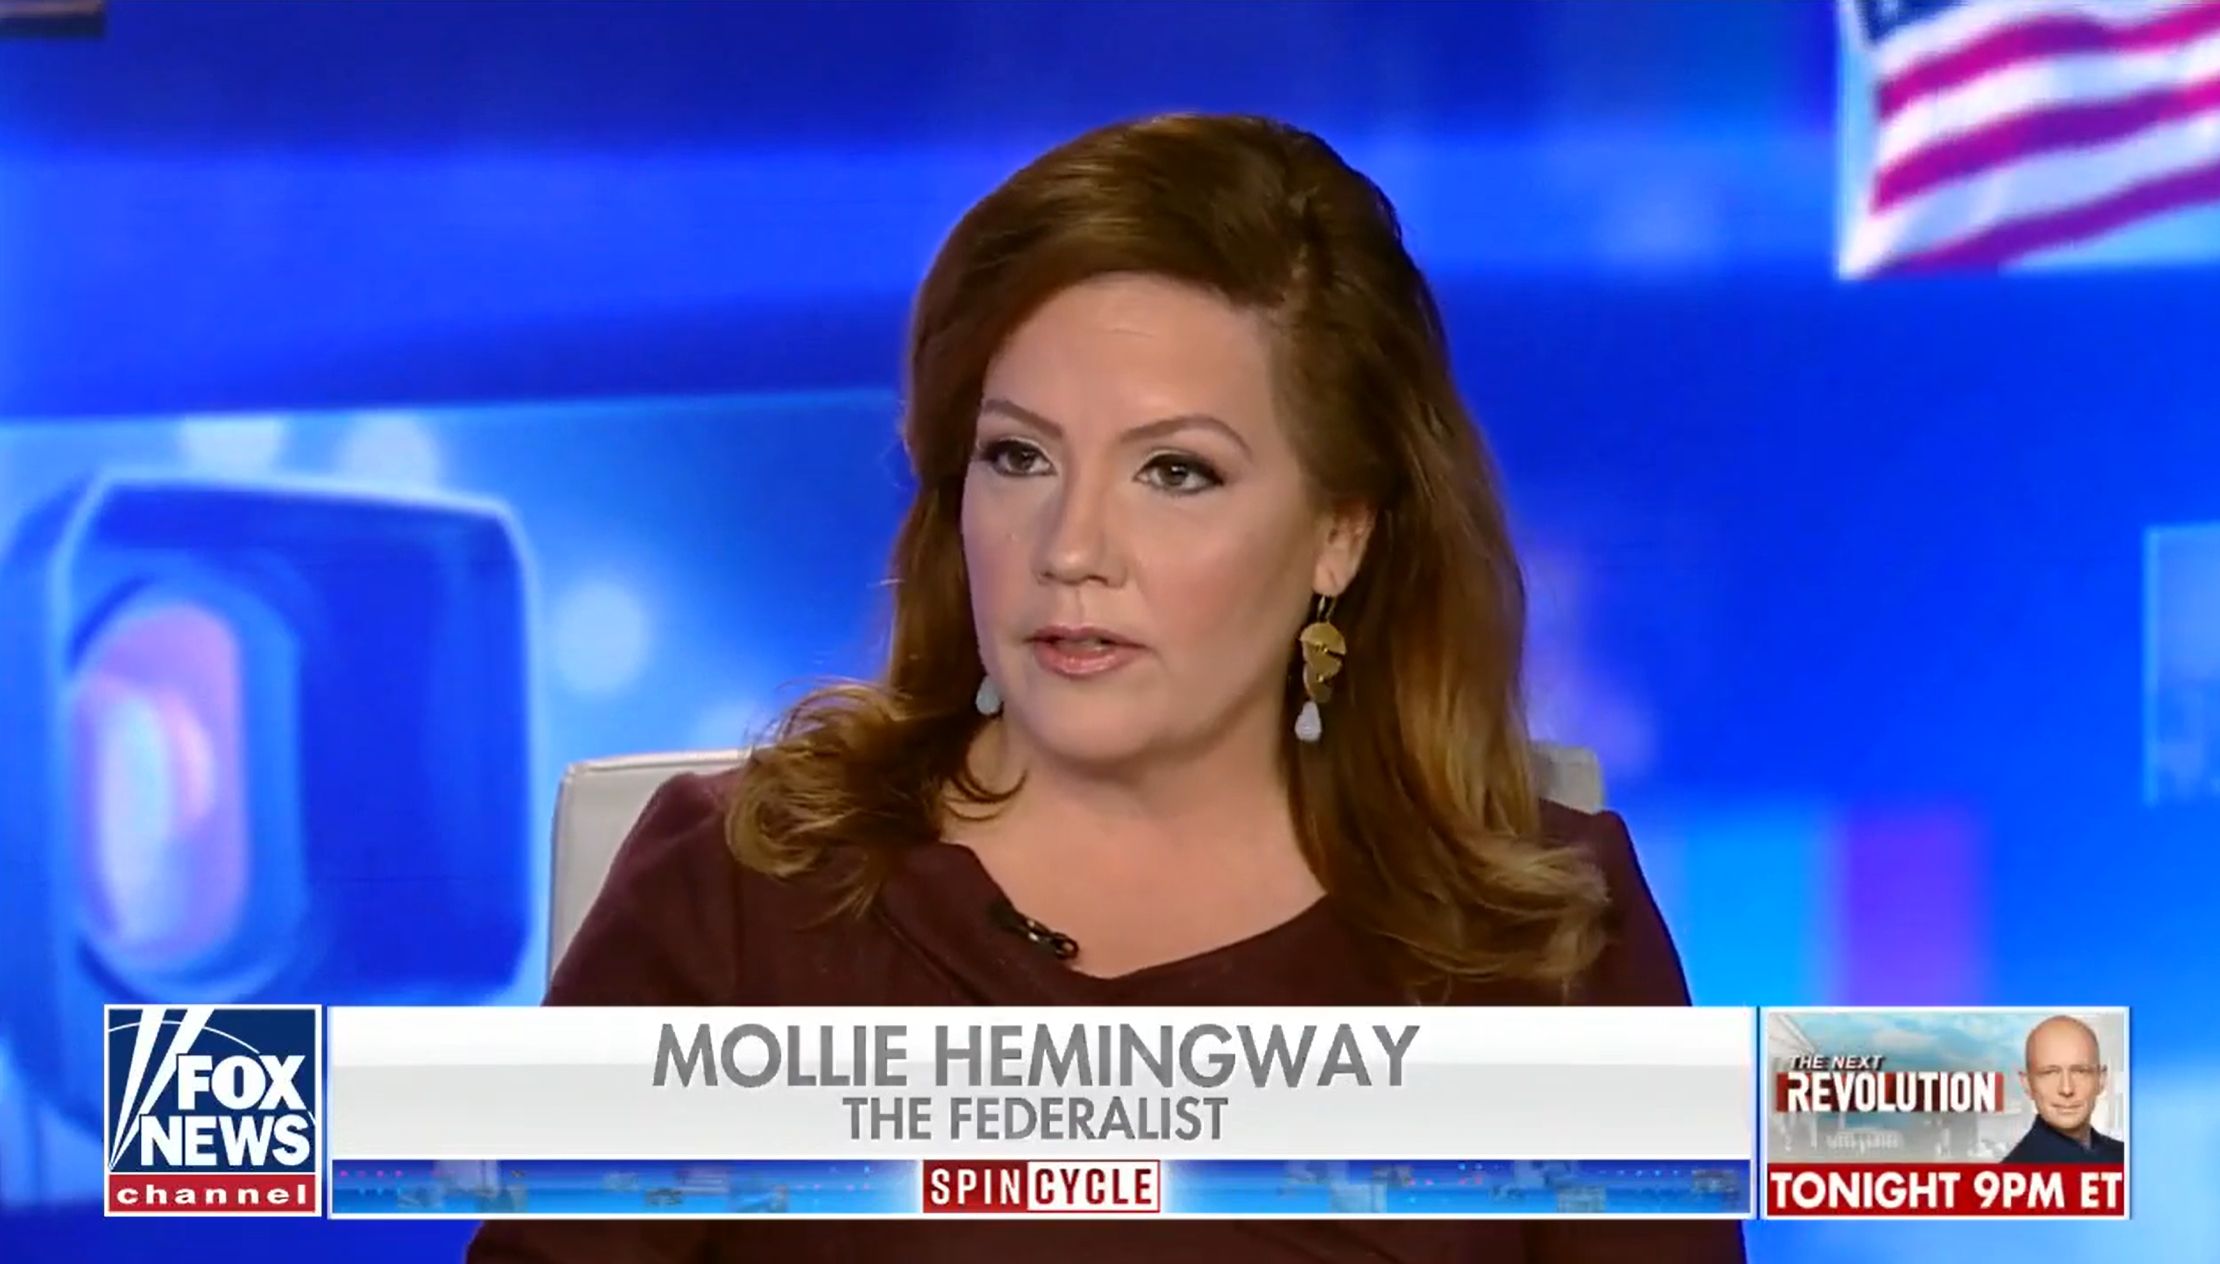 Liberty Chats Episode 36 Mollie Hemingway The Federalist The Steamboat Institute 2621